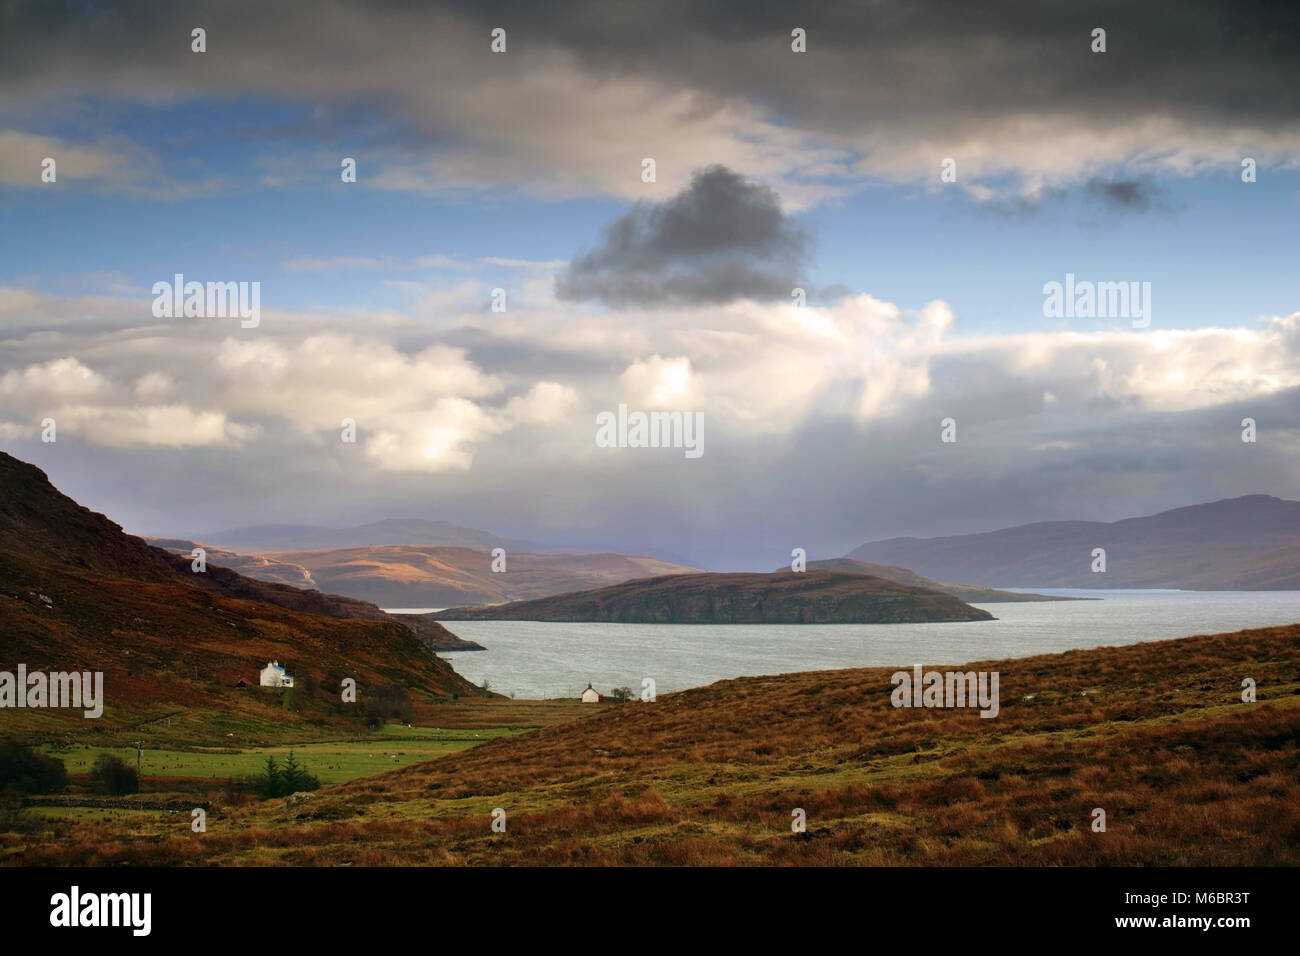 A winter view across the Wester Ross coast looking towards Loch Broom as clouds gather. Stock Photo